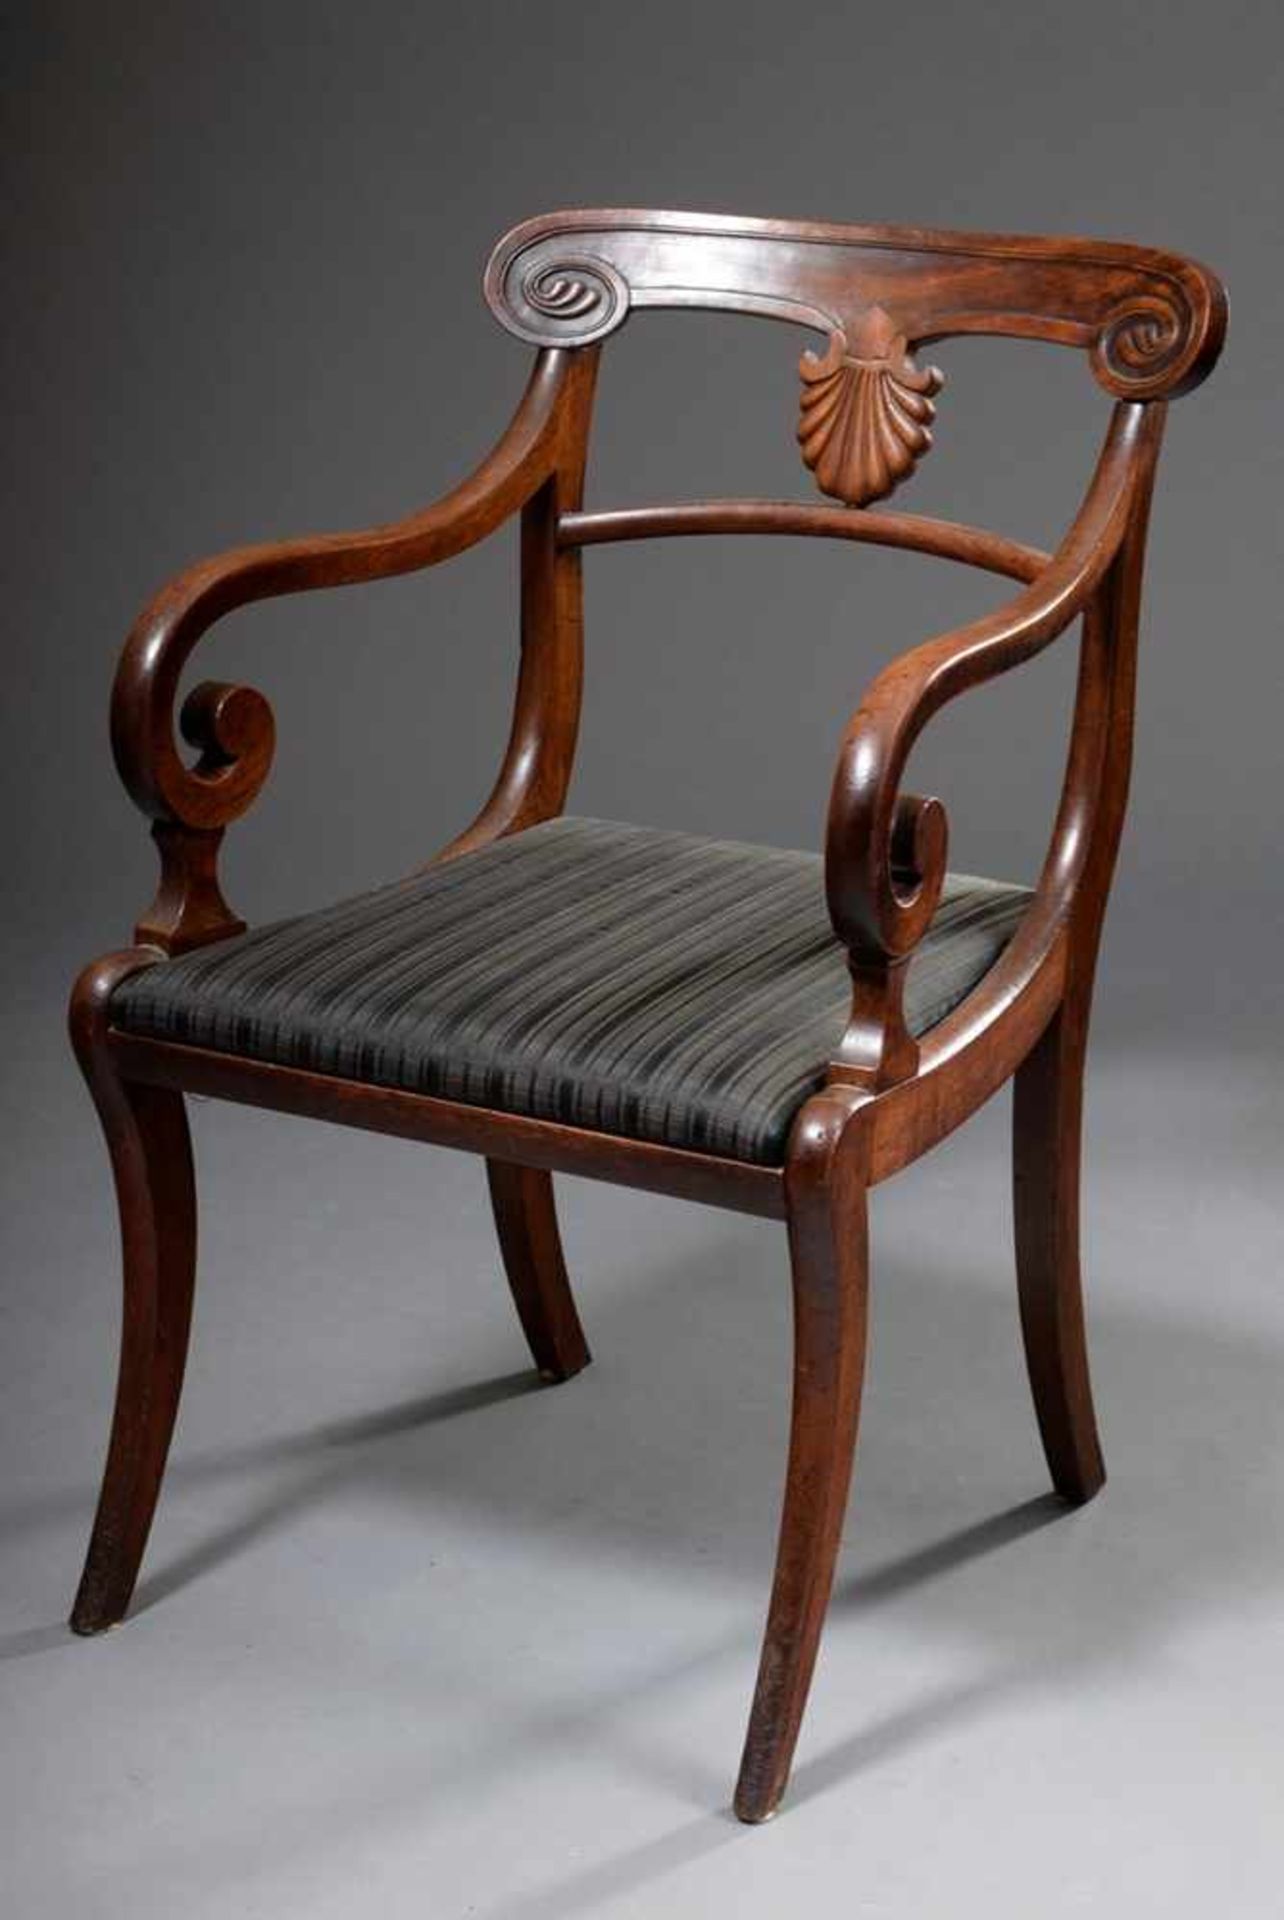 5 English Sheraton chairs with carved backrests and sabre legs, 1x with armrests, mahogany, - Image 5 of 7